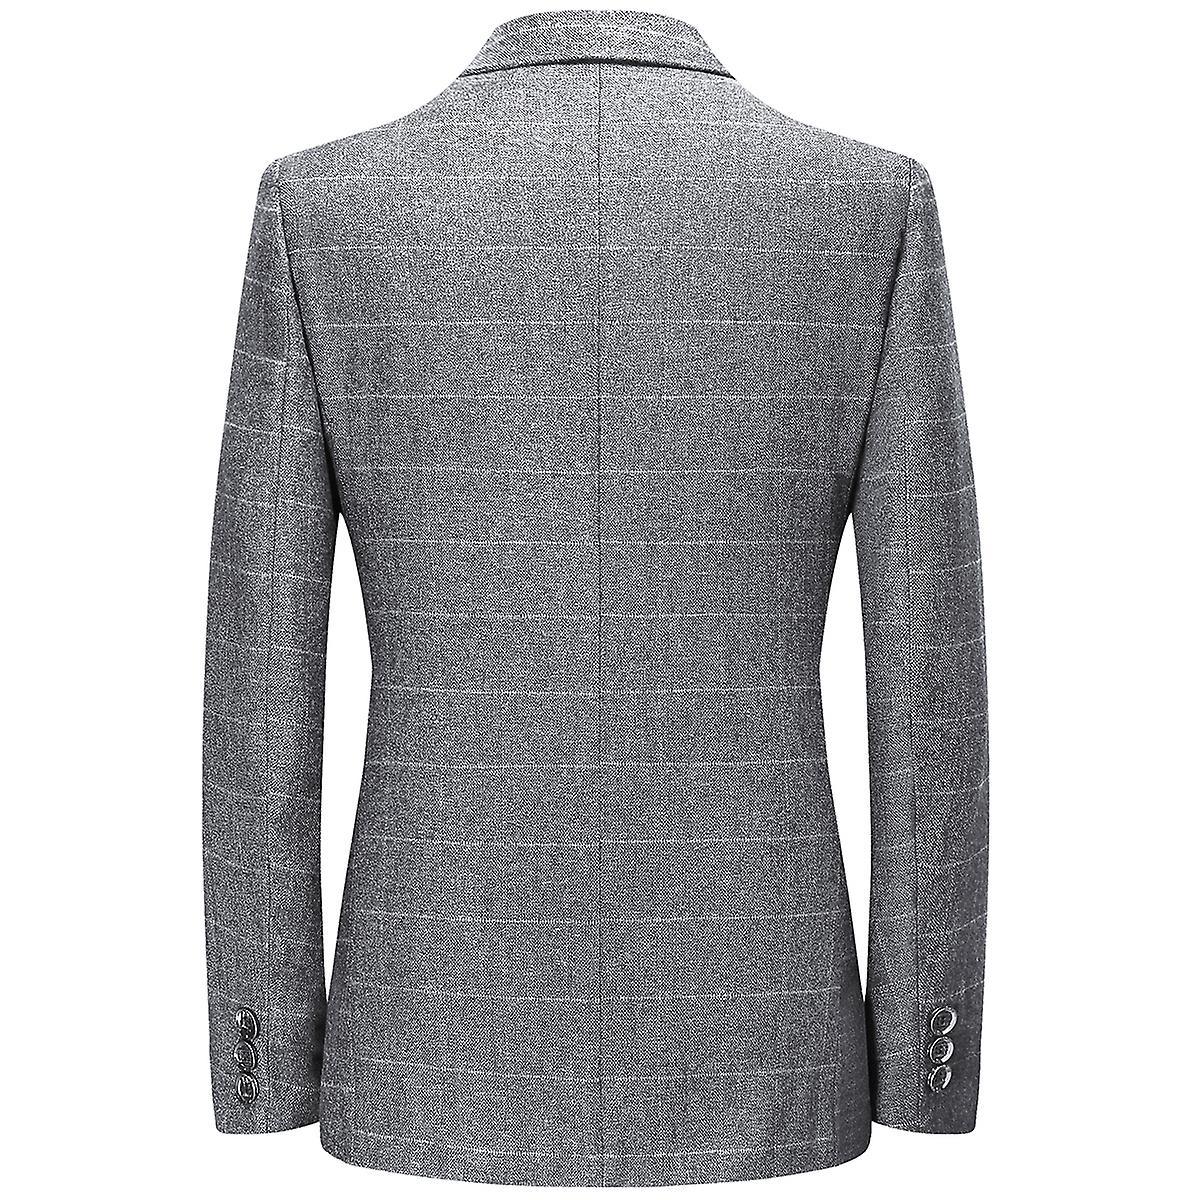 Men's Casual Notched Lapel Single-breasted Check Blazer